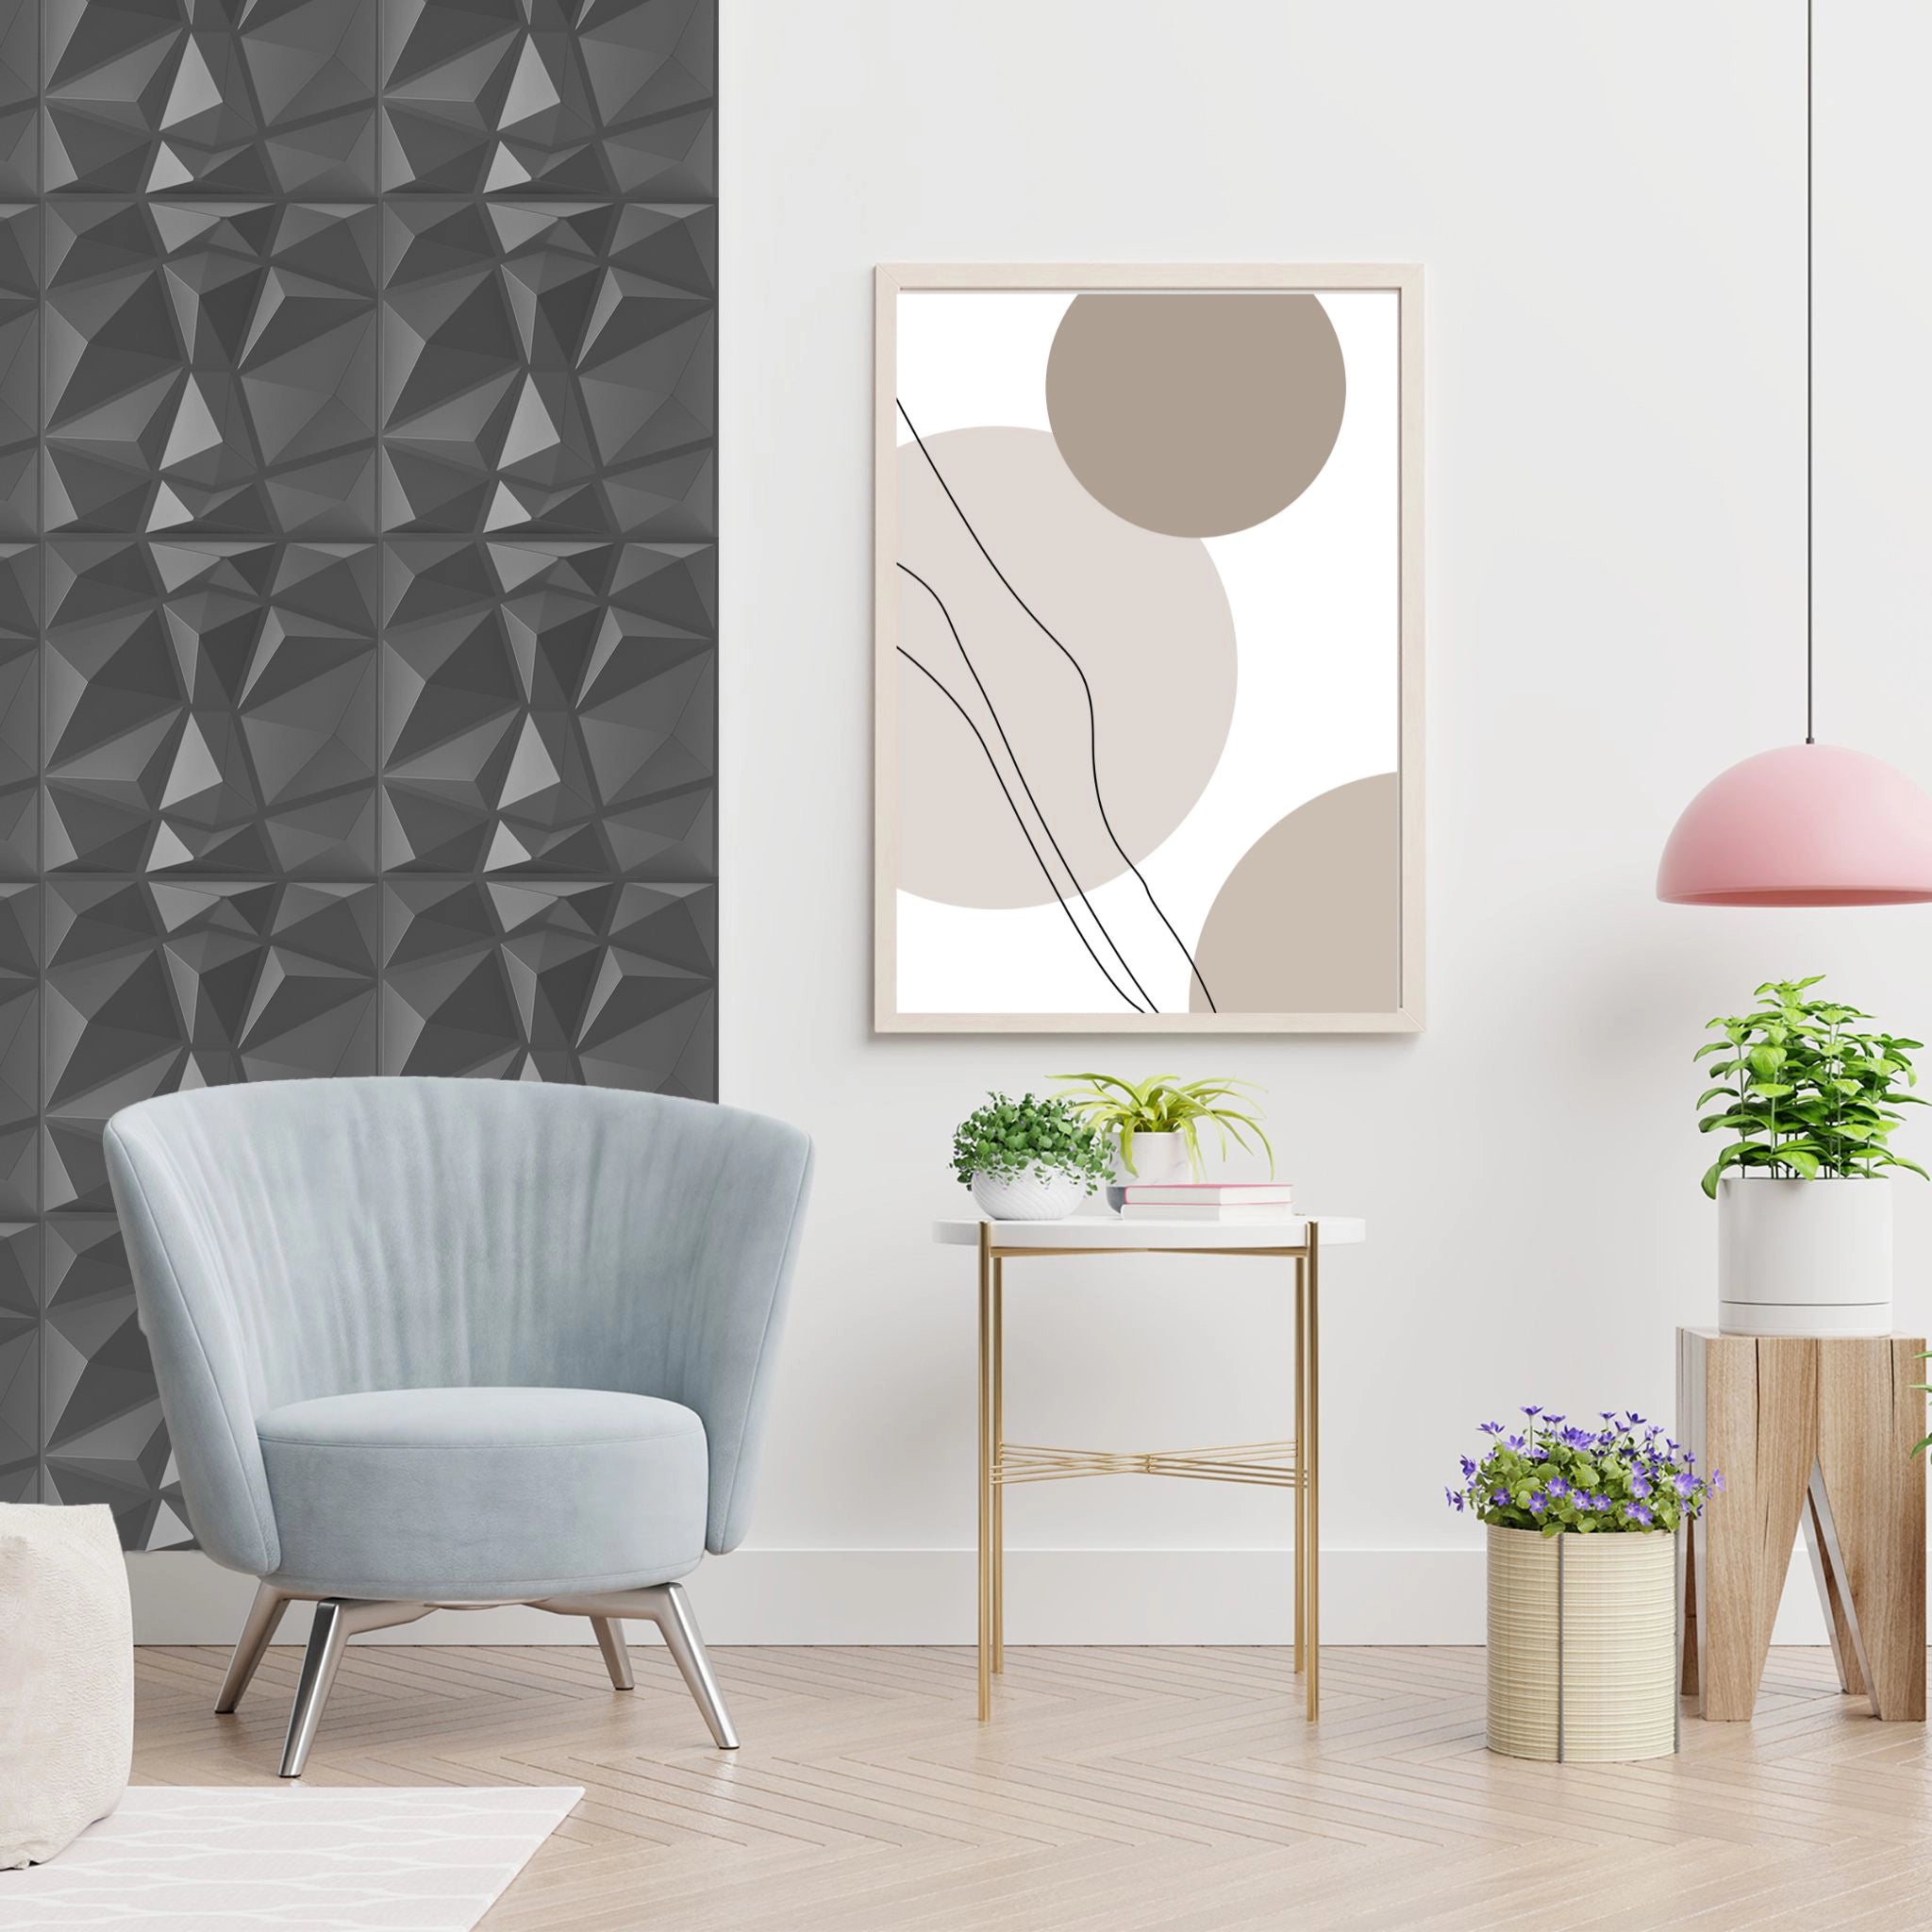 Silver PVC wall panel with geometric design in stylish living room